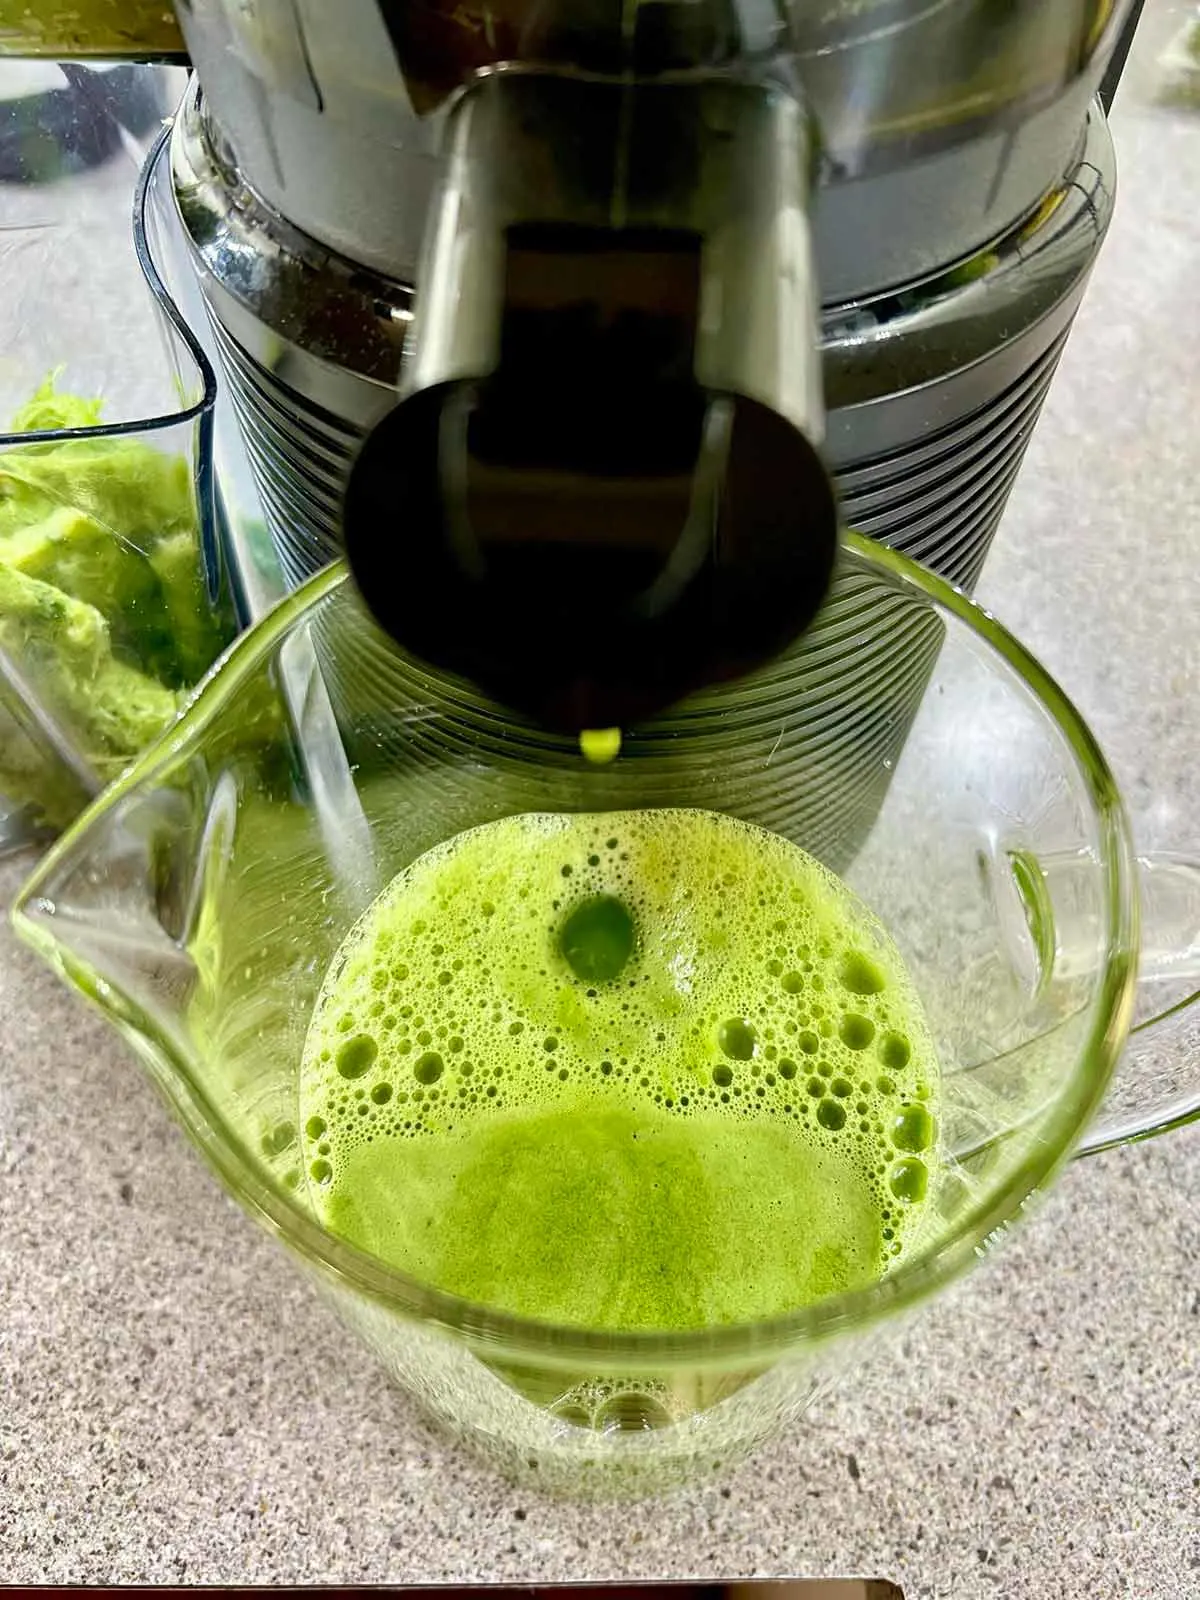 Close-up photo showing the celery and pineapple juice freshly made.